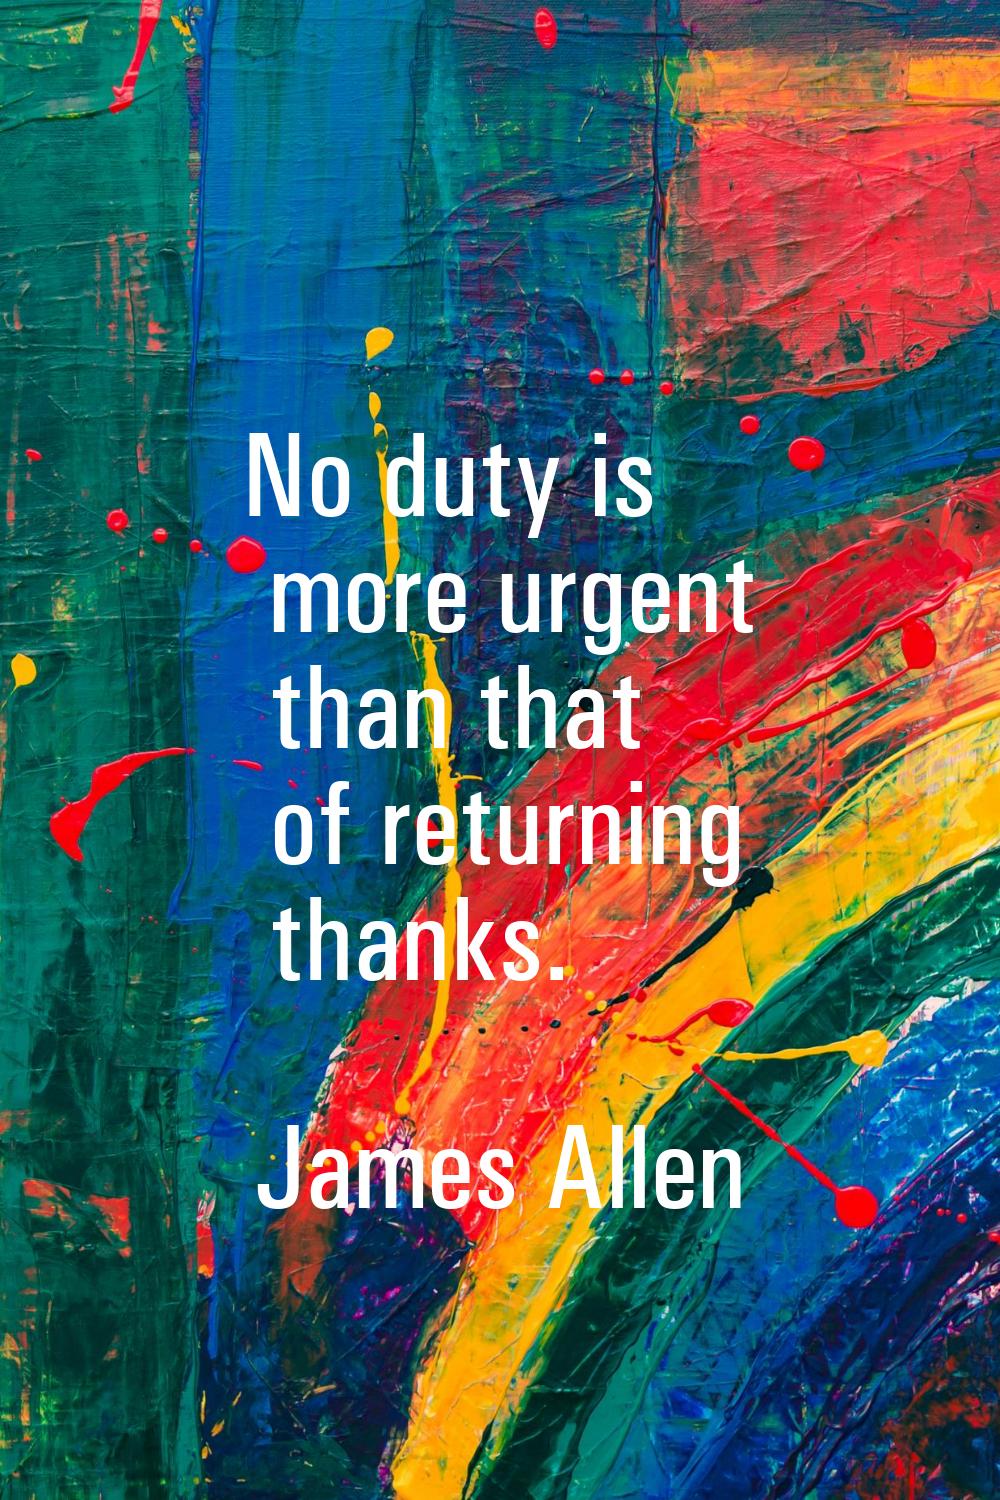 No duty is more urgent than that of returning thanks.